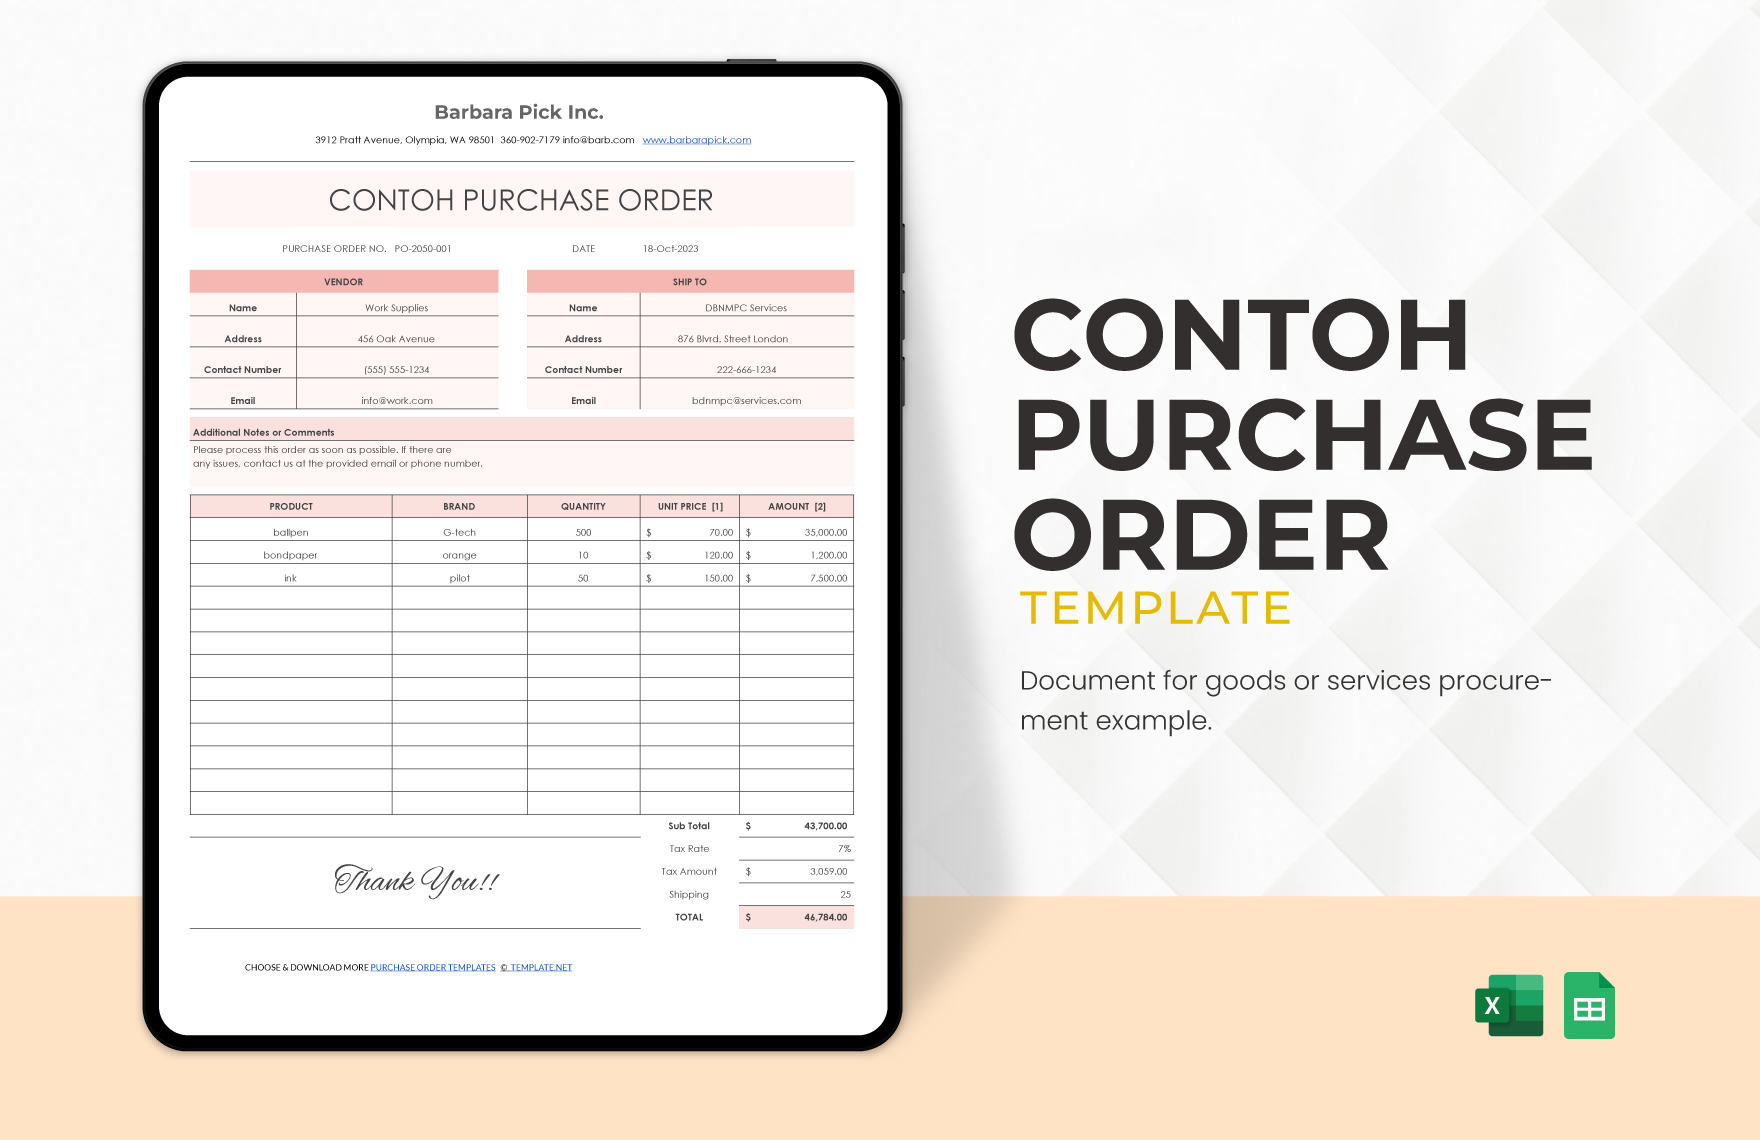 Contoh Purchase Order Template